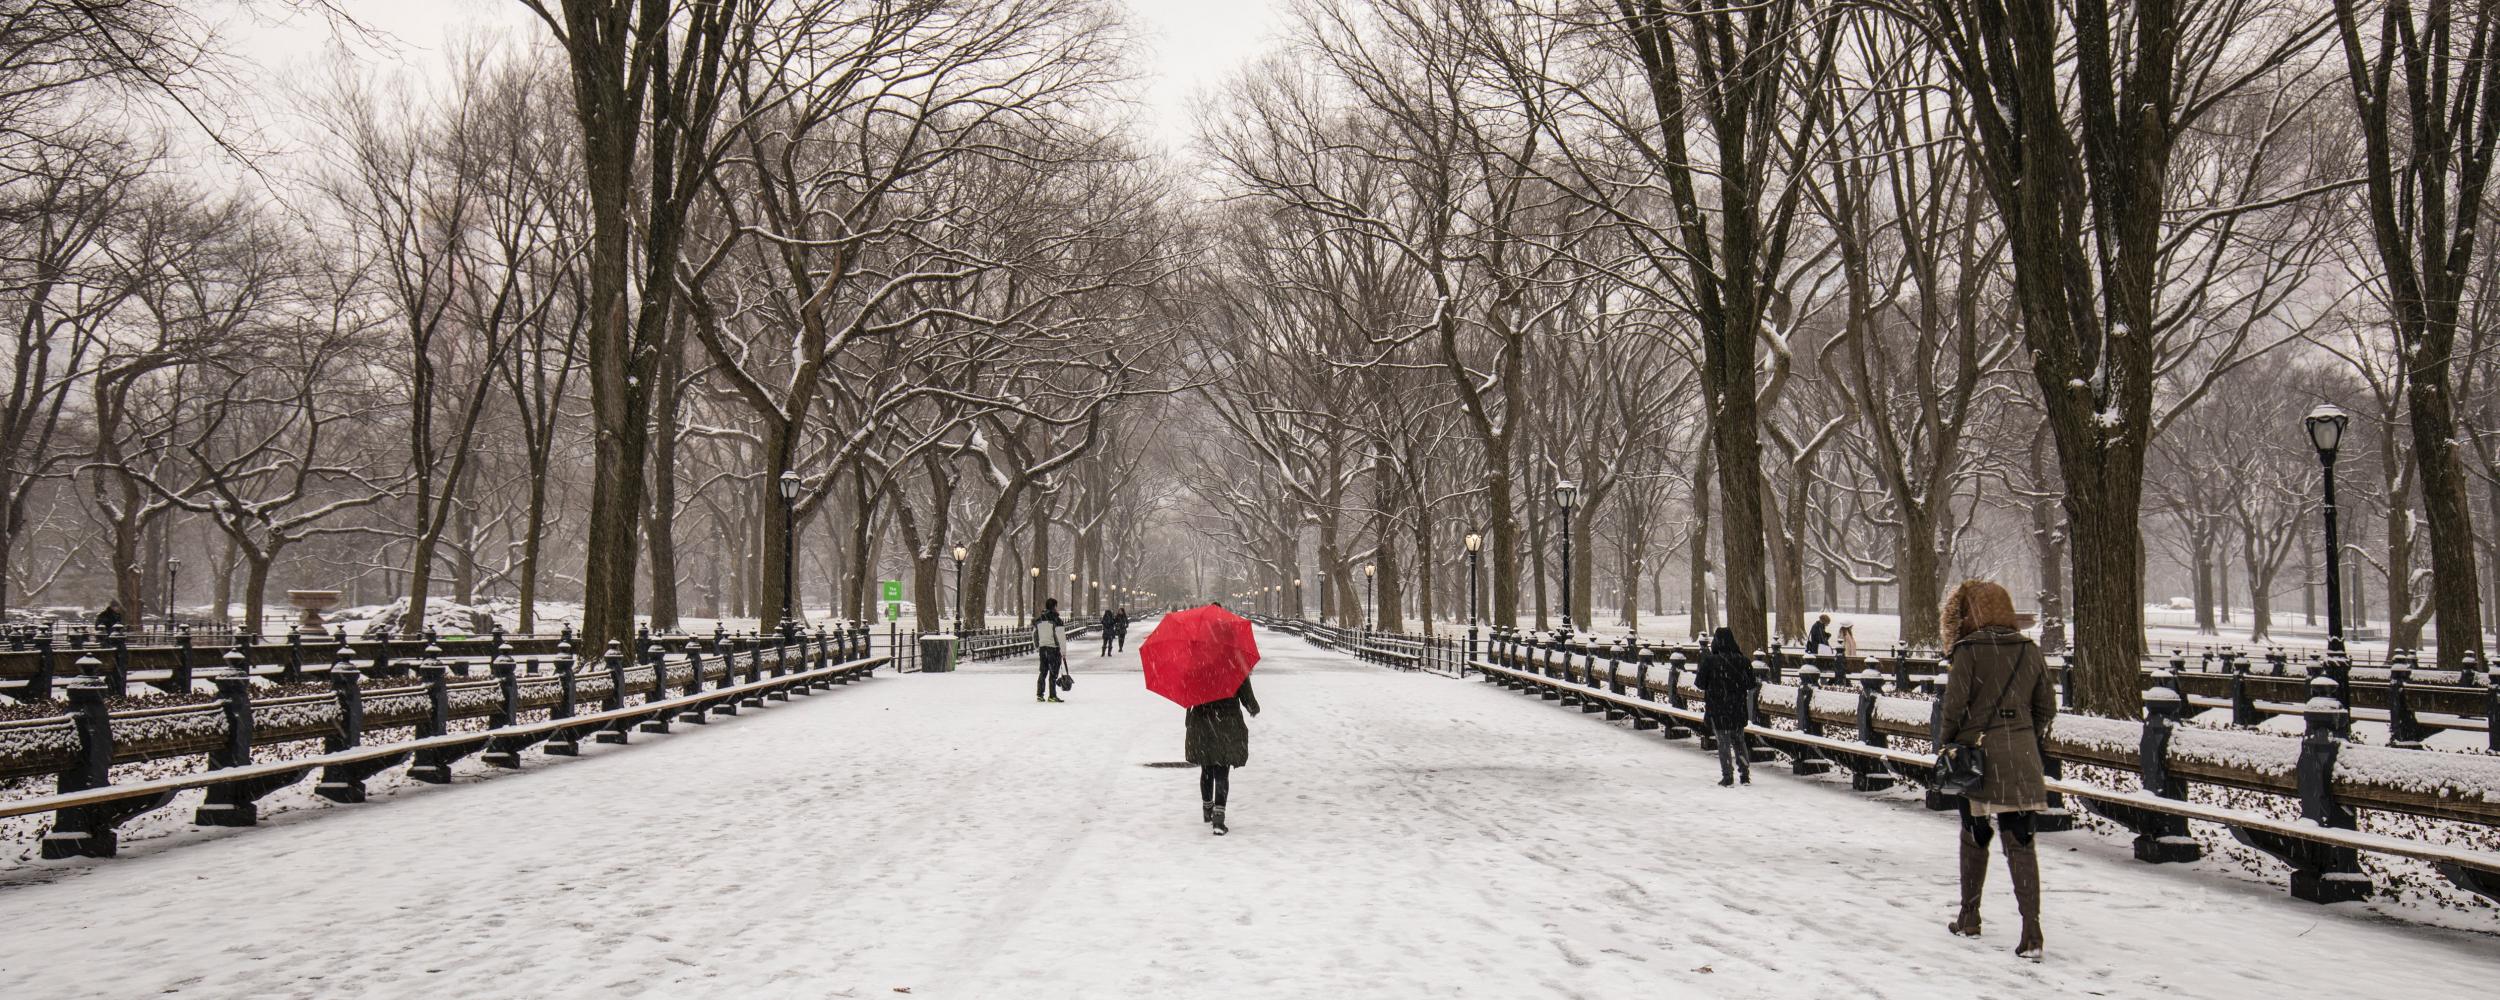 a person in a red coat walks down a snow-covered pathway